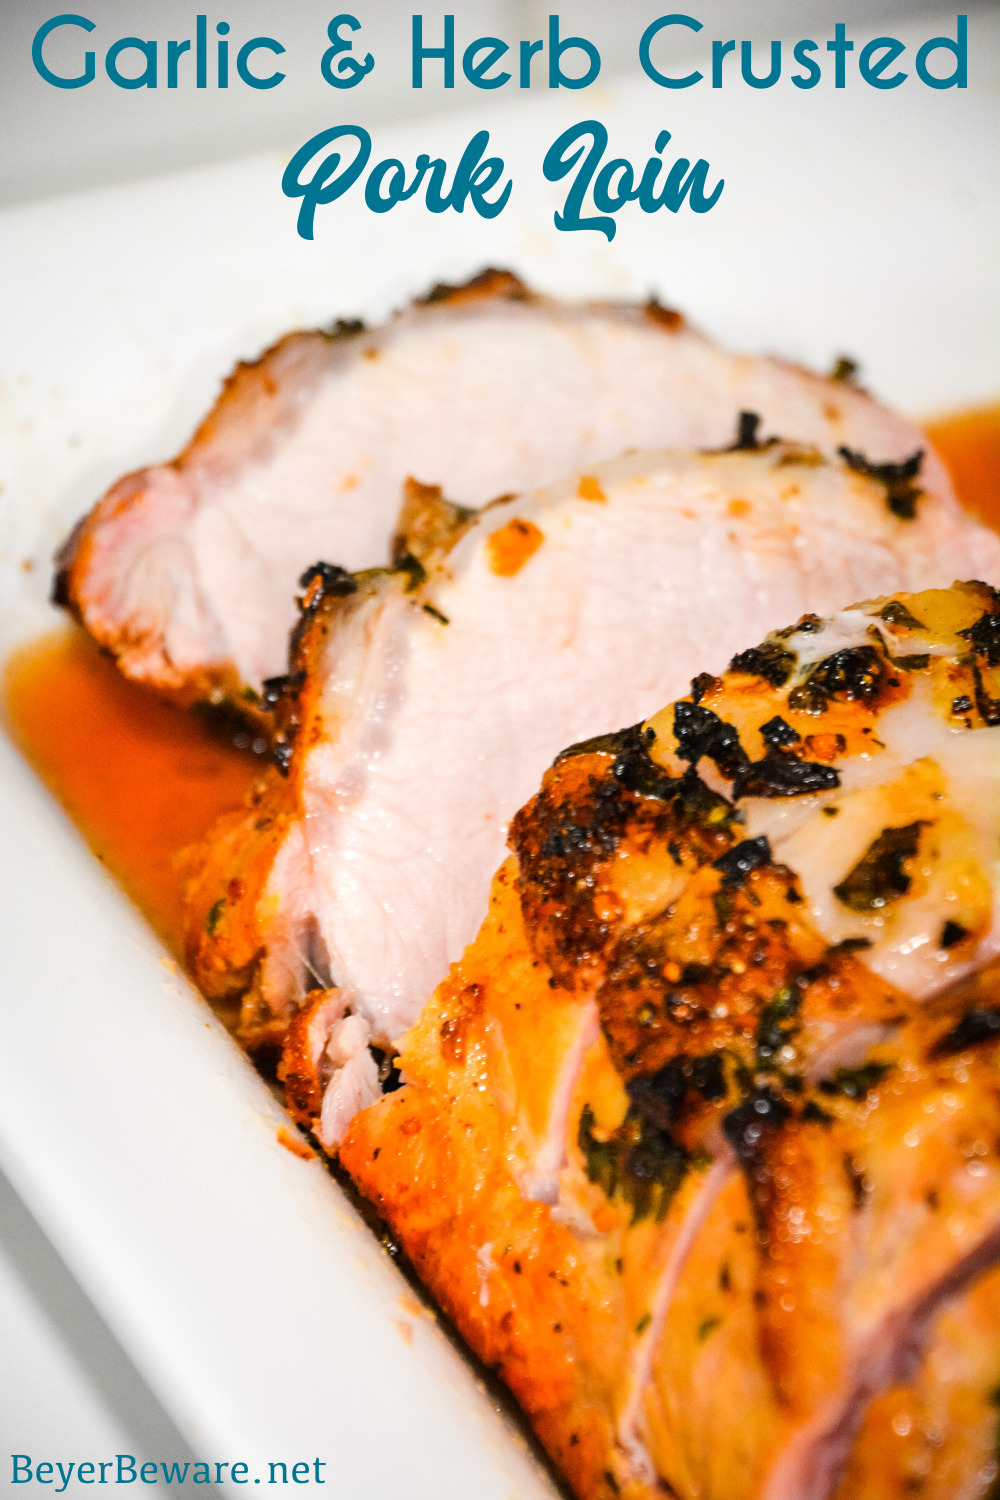 Garlic and Herb Crusted Grilled Pork Loin uses fresh herbs, garlic, and onions with simple wine, lemon juice, and oil marinade then grilled to juicy pork loin perfection. 